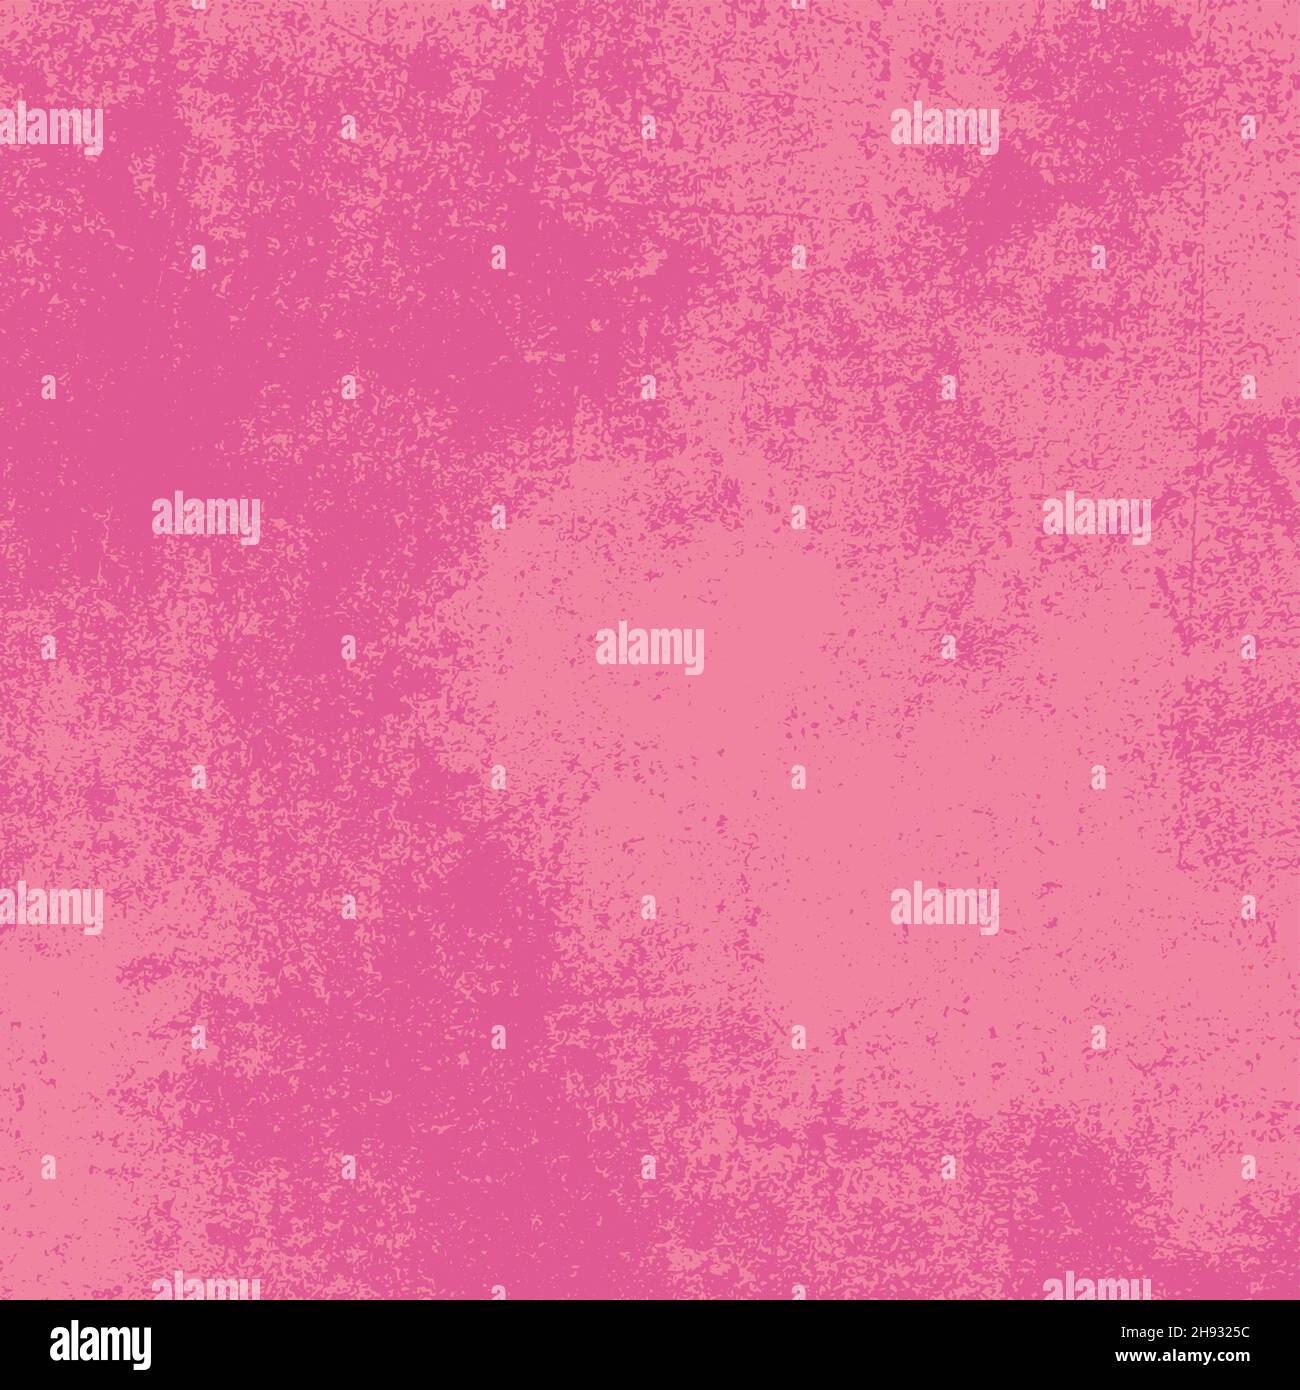 https://c8.alamy.com/comp/2H9325C/grunge-overlay-pacific-pink-urban-texture-distress-texture-of-spots-stains-ink-dots-scratches-design-element-for-pattern-grungy-effect-2H9325C.jpg